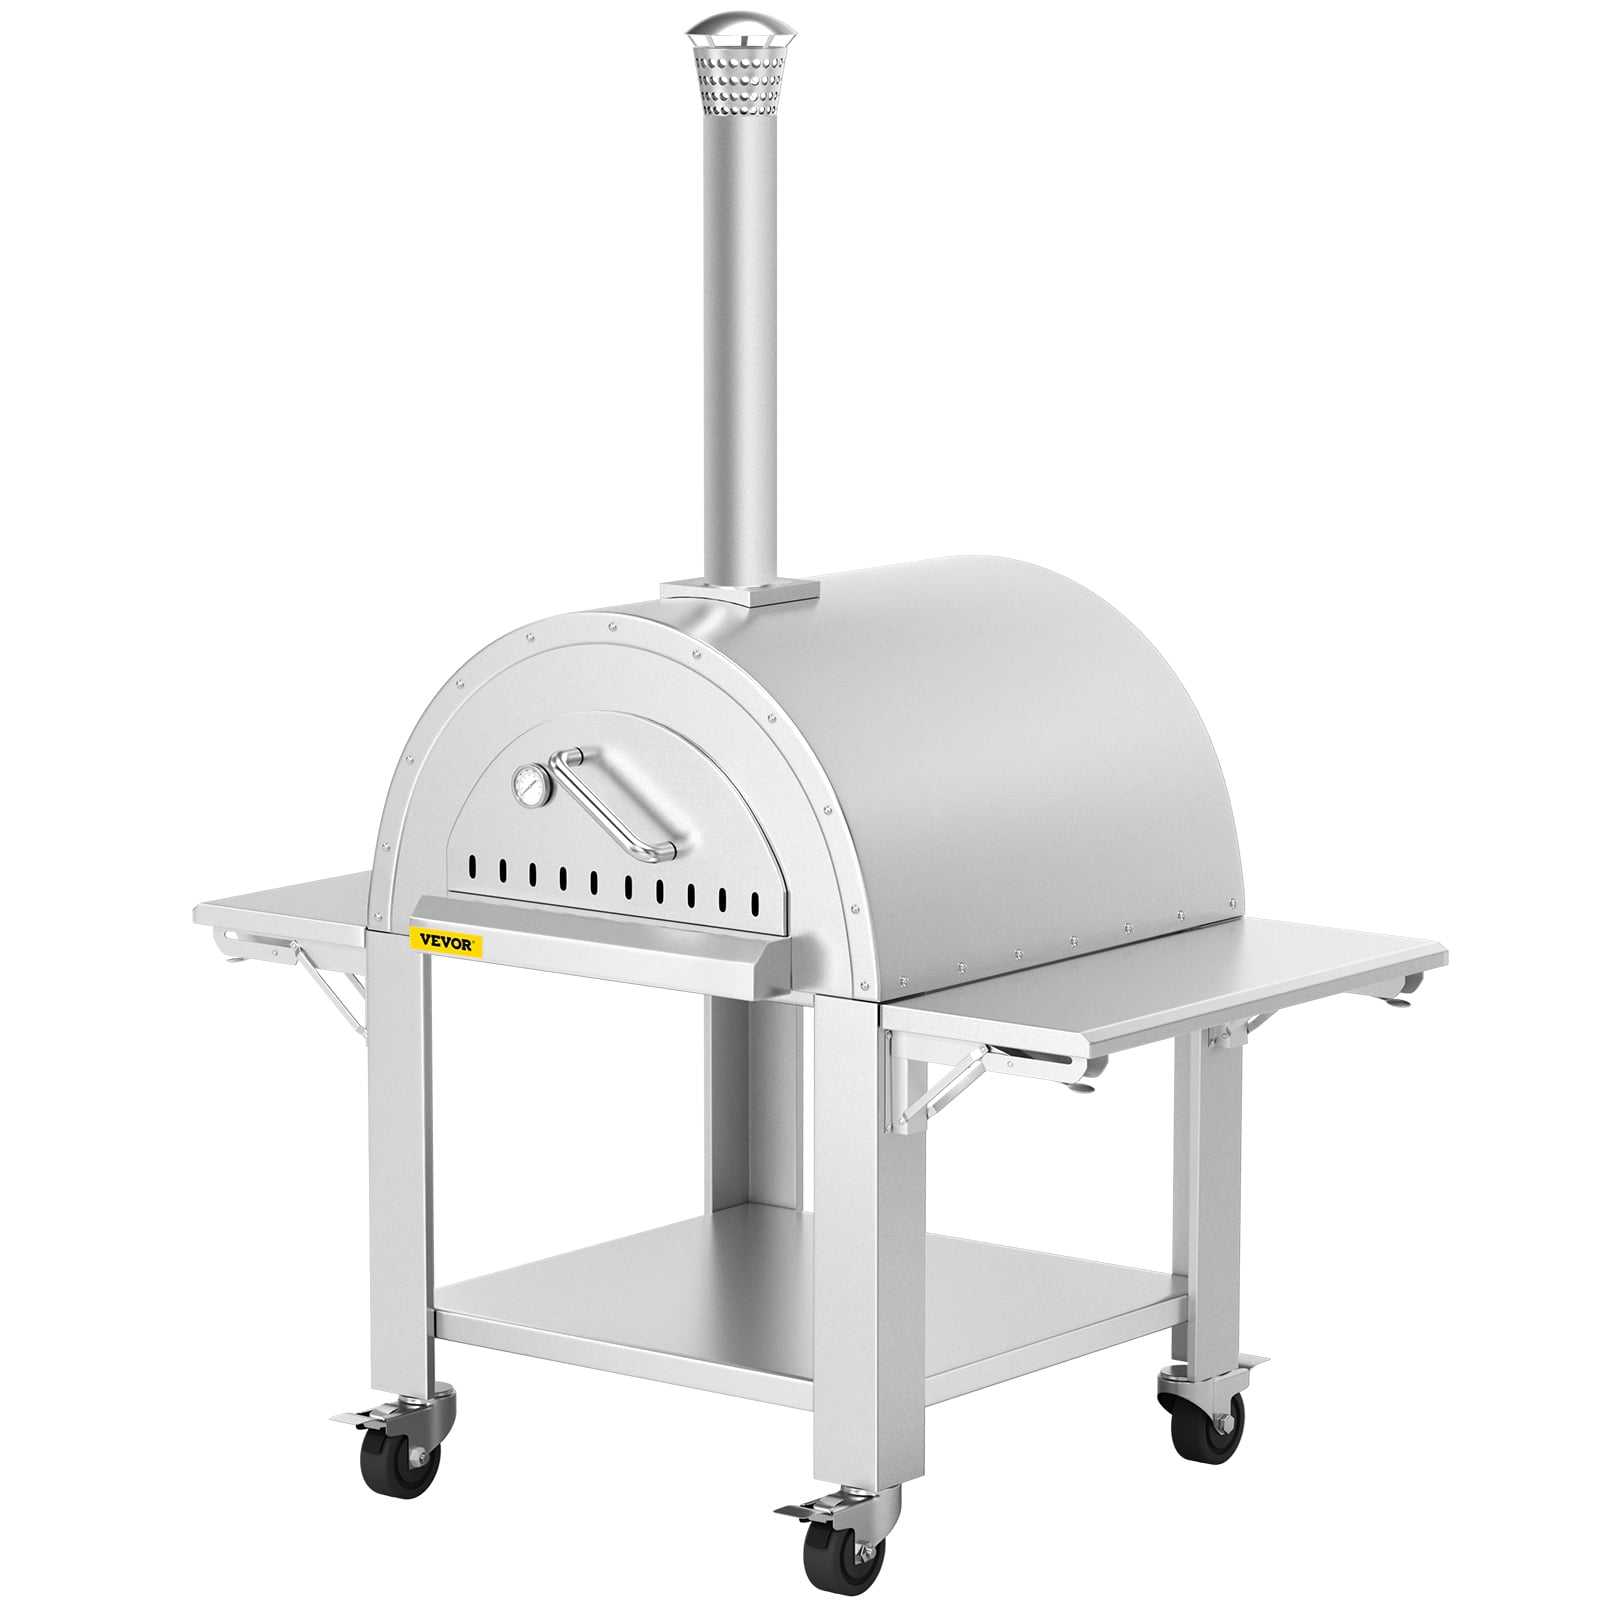 Outdoor Pizza Oven Kit - Includes Pizza Stone – Outdoor Pizza Company